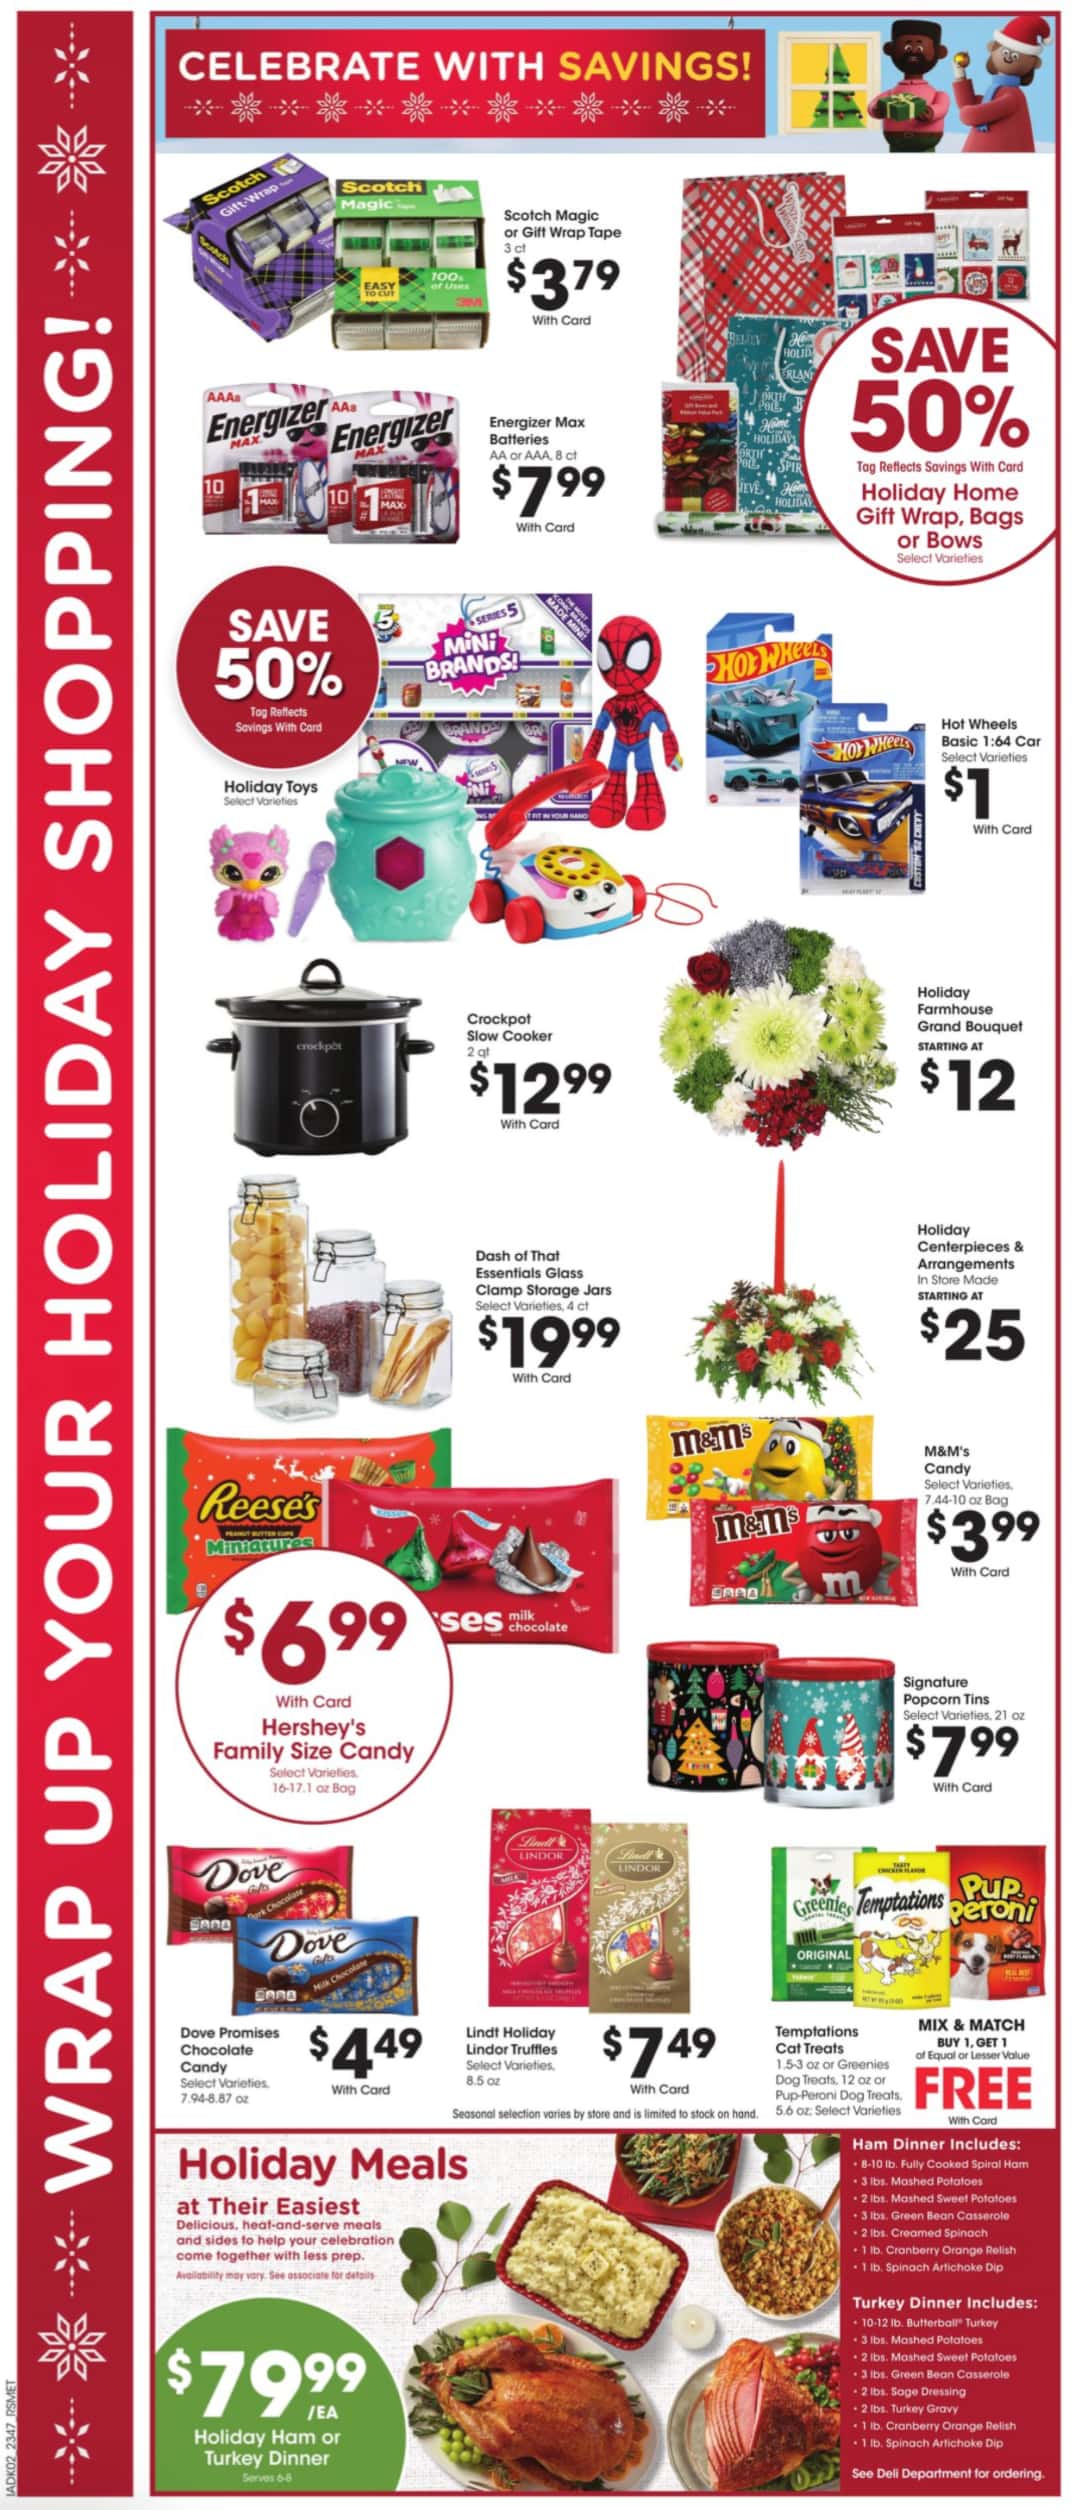 Pick n Save Christmas July 2024 Weekly Sales, Deals, Discounts and Digital Coupons.